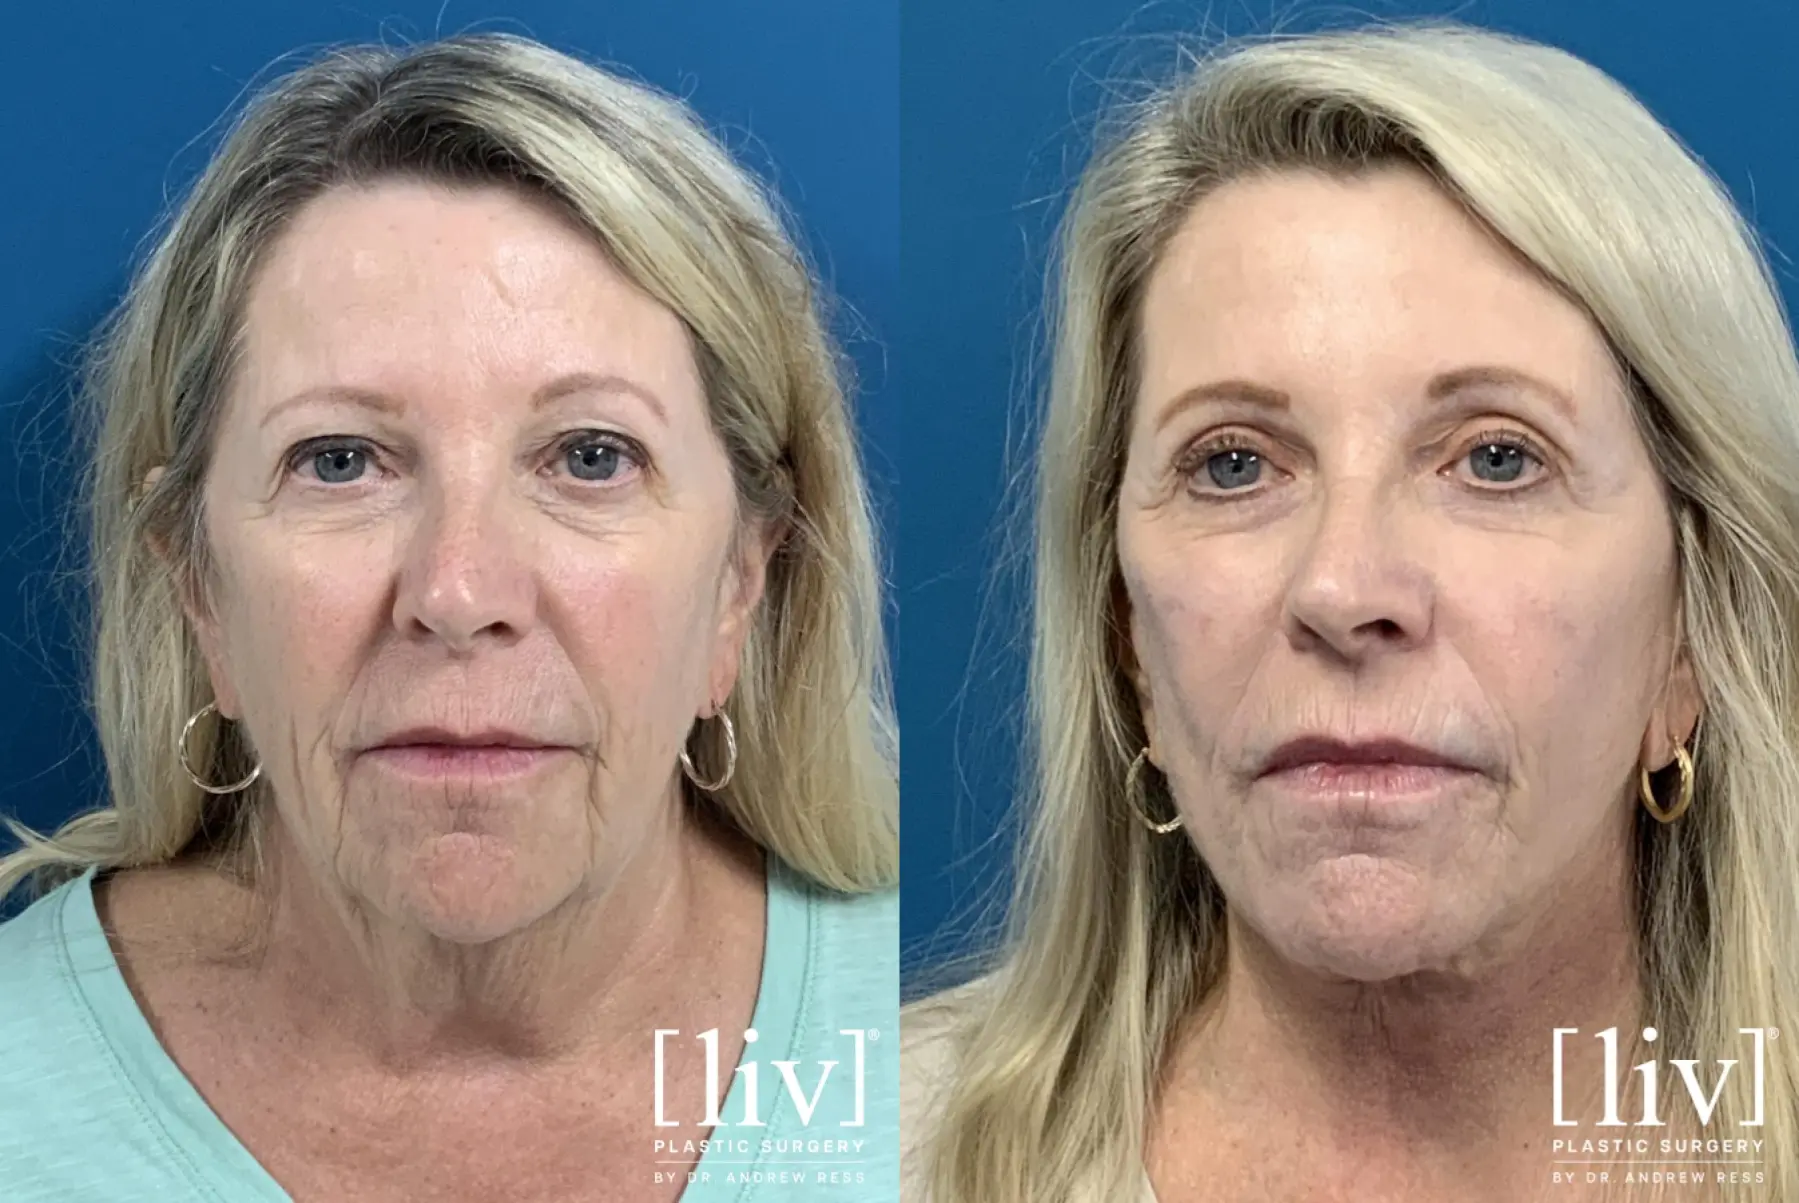 Face and Neck Lift, Co2 Laser, Fat Transfer, Upper Eyelid - Before and After 1